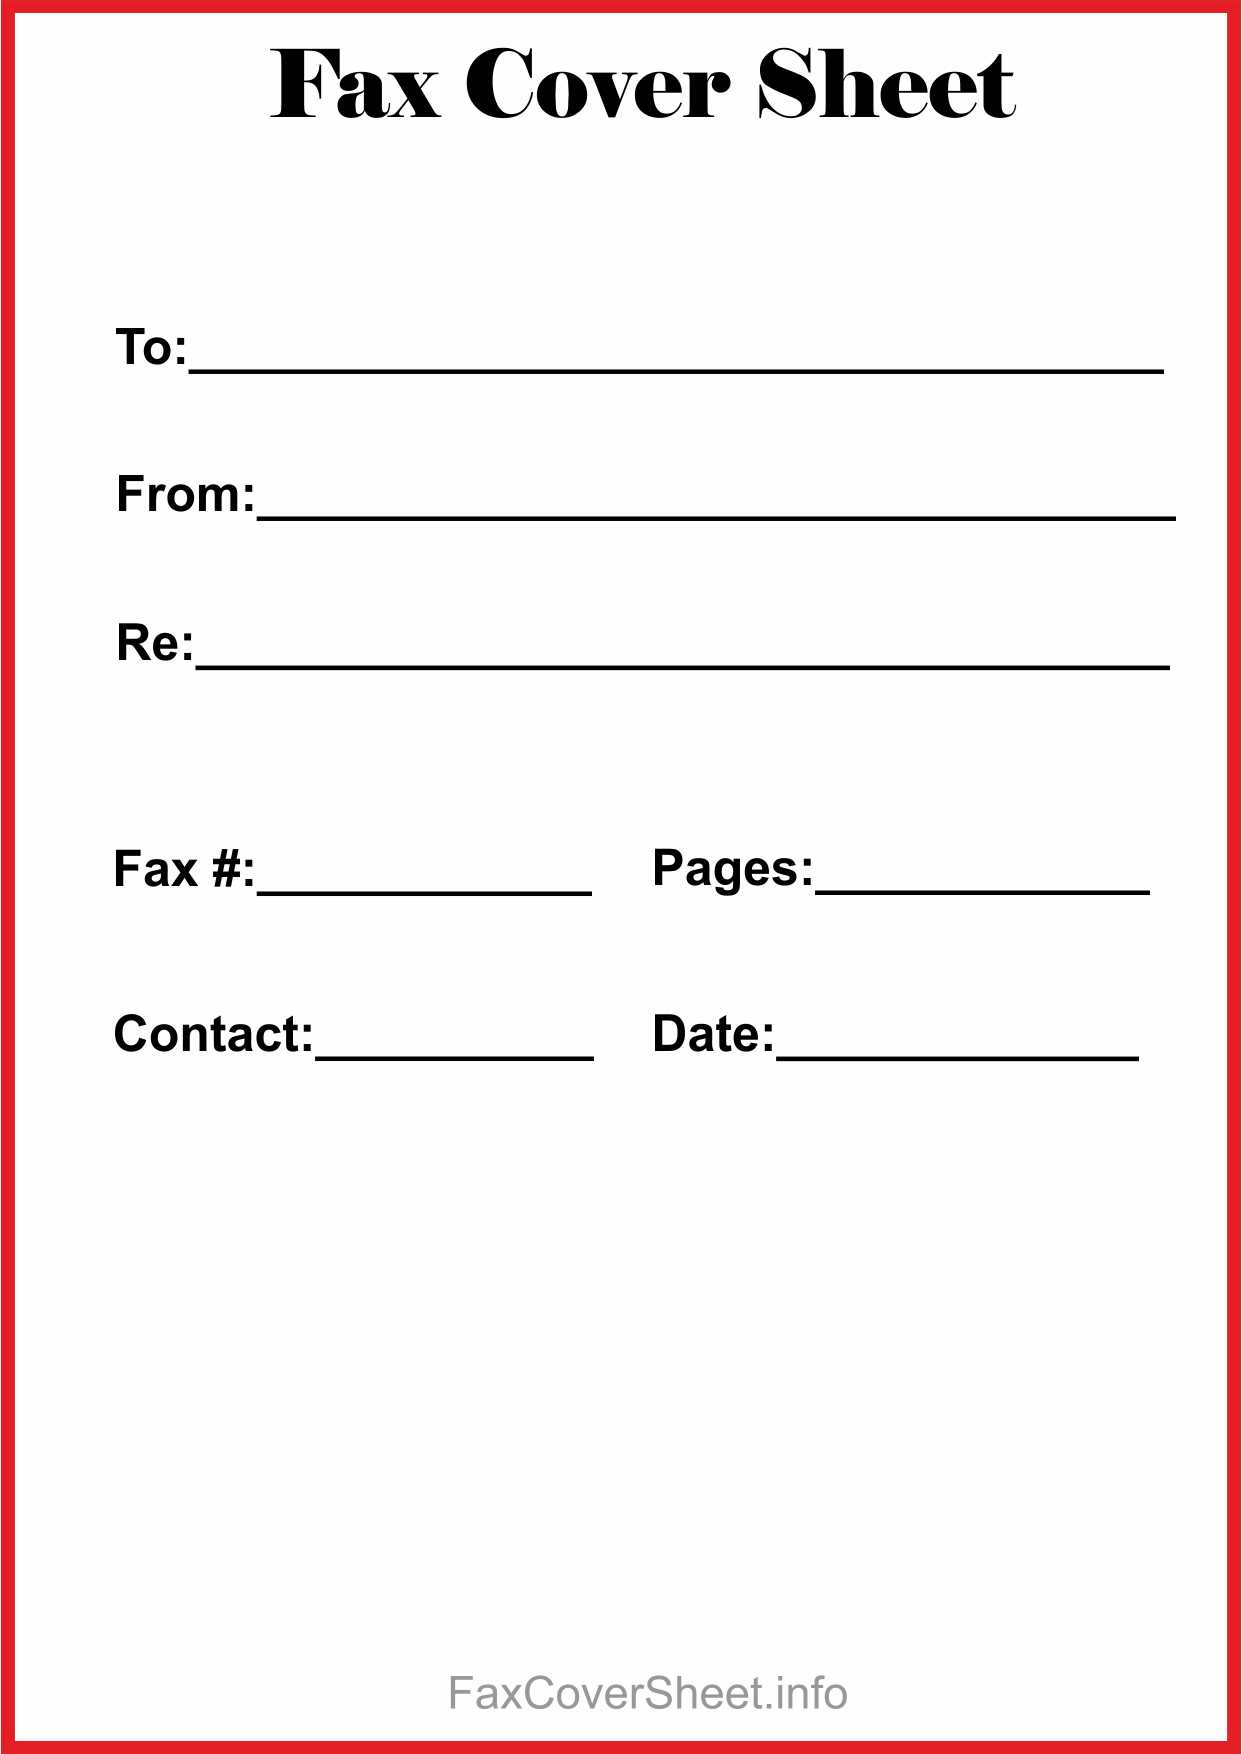 How To Find Blank Fax Cover Sheet Within Microsoft Word Within Fax Template Word 2010